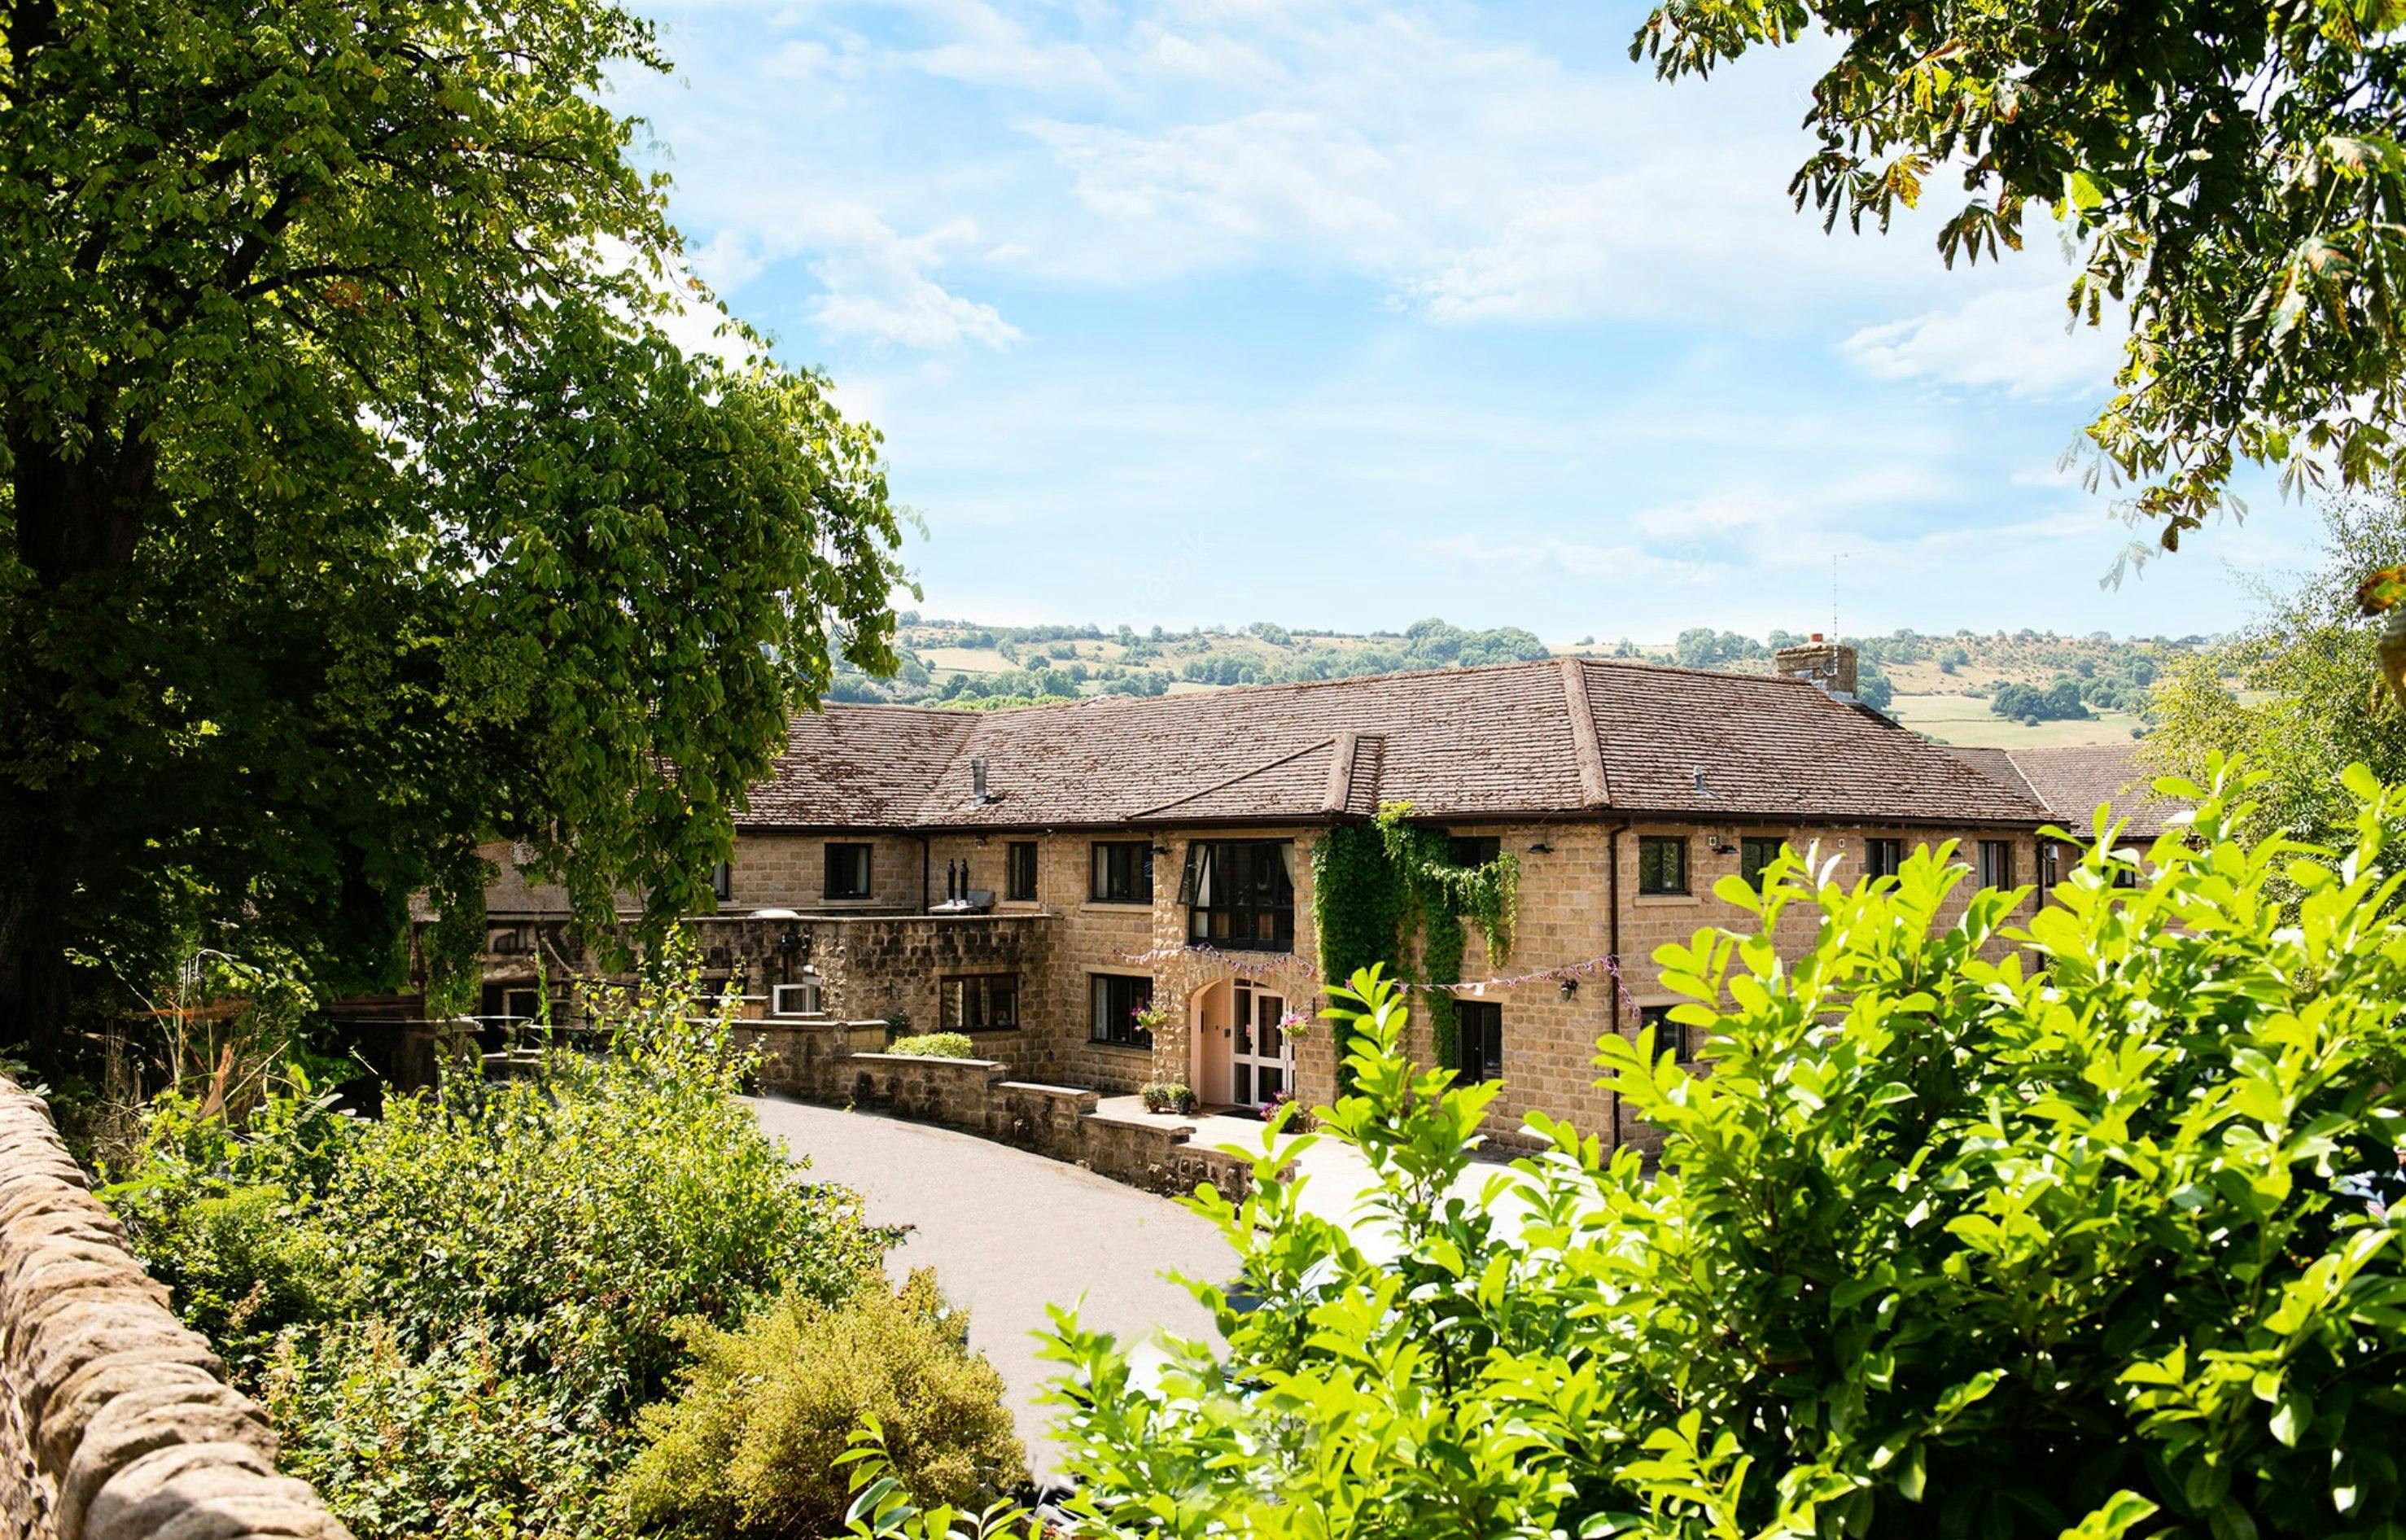 Ashmere Derbyshire - Valley Lodge care home 000